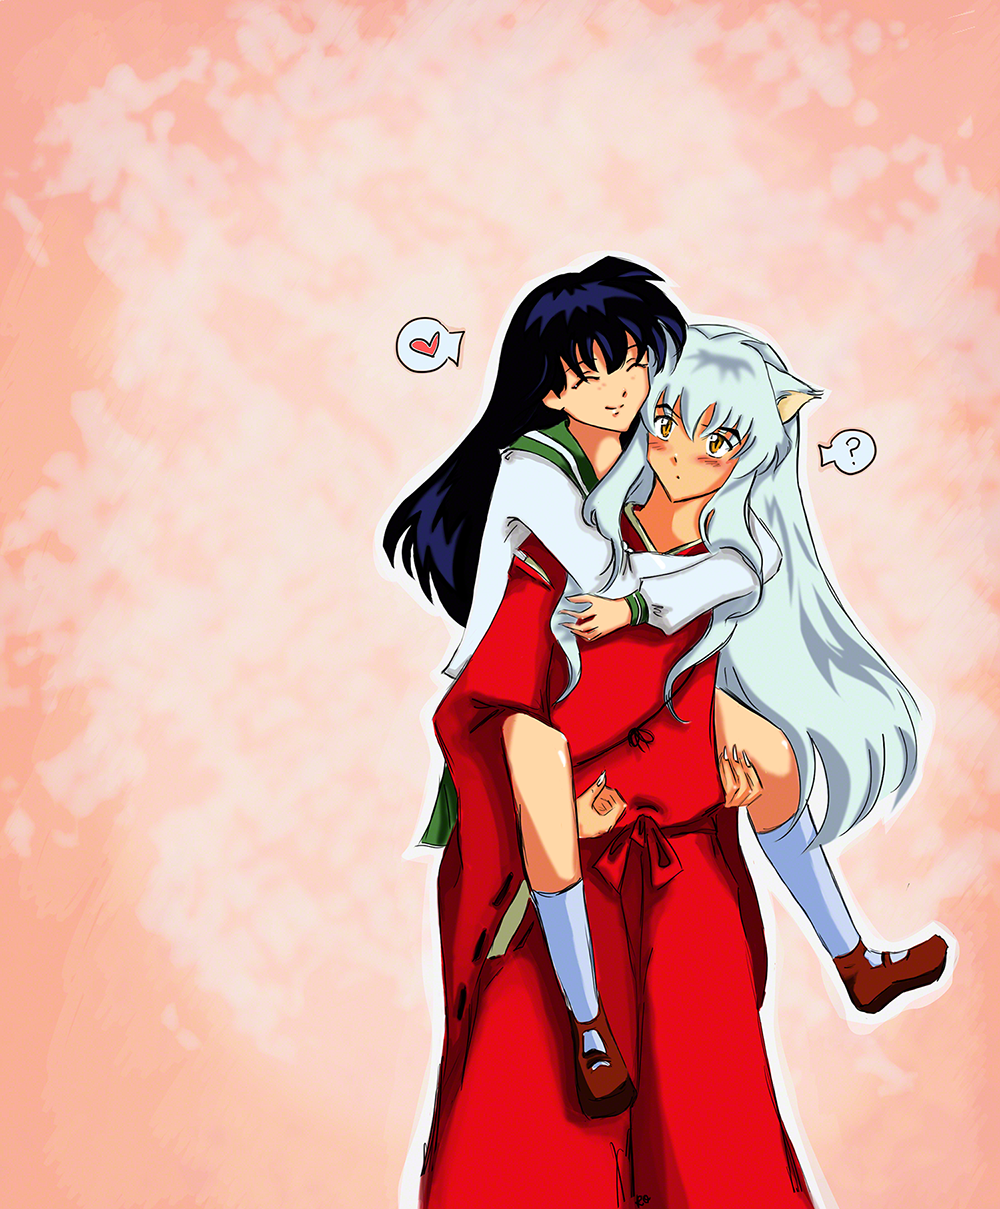 Inuyasha and Kagome: Sweet Love by Rocioo on DeviantArt